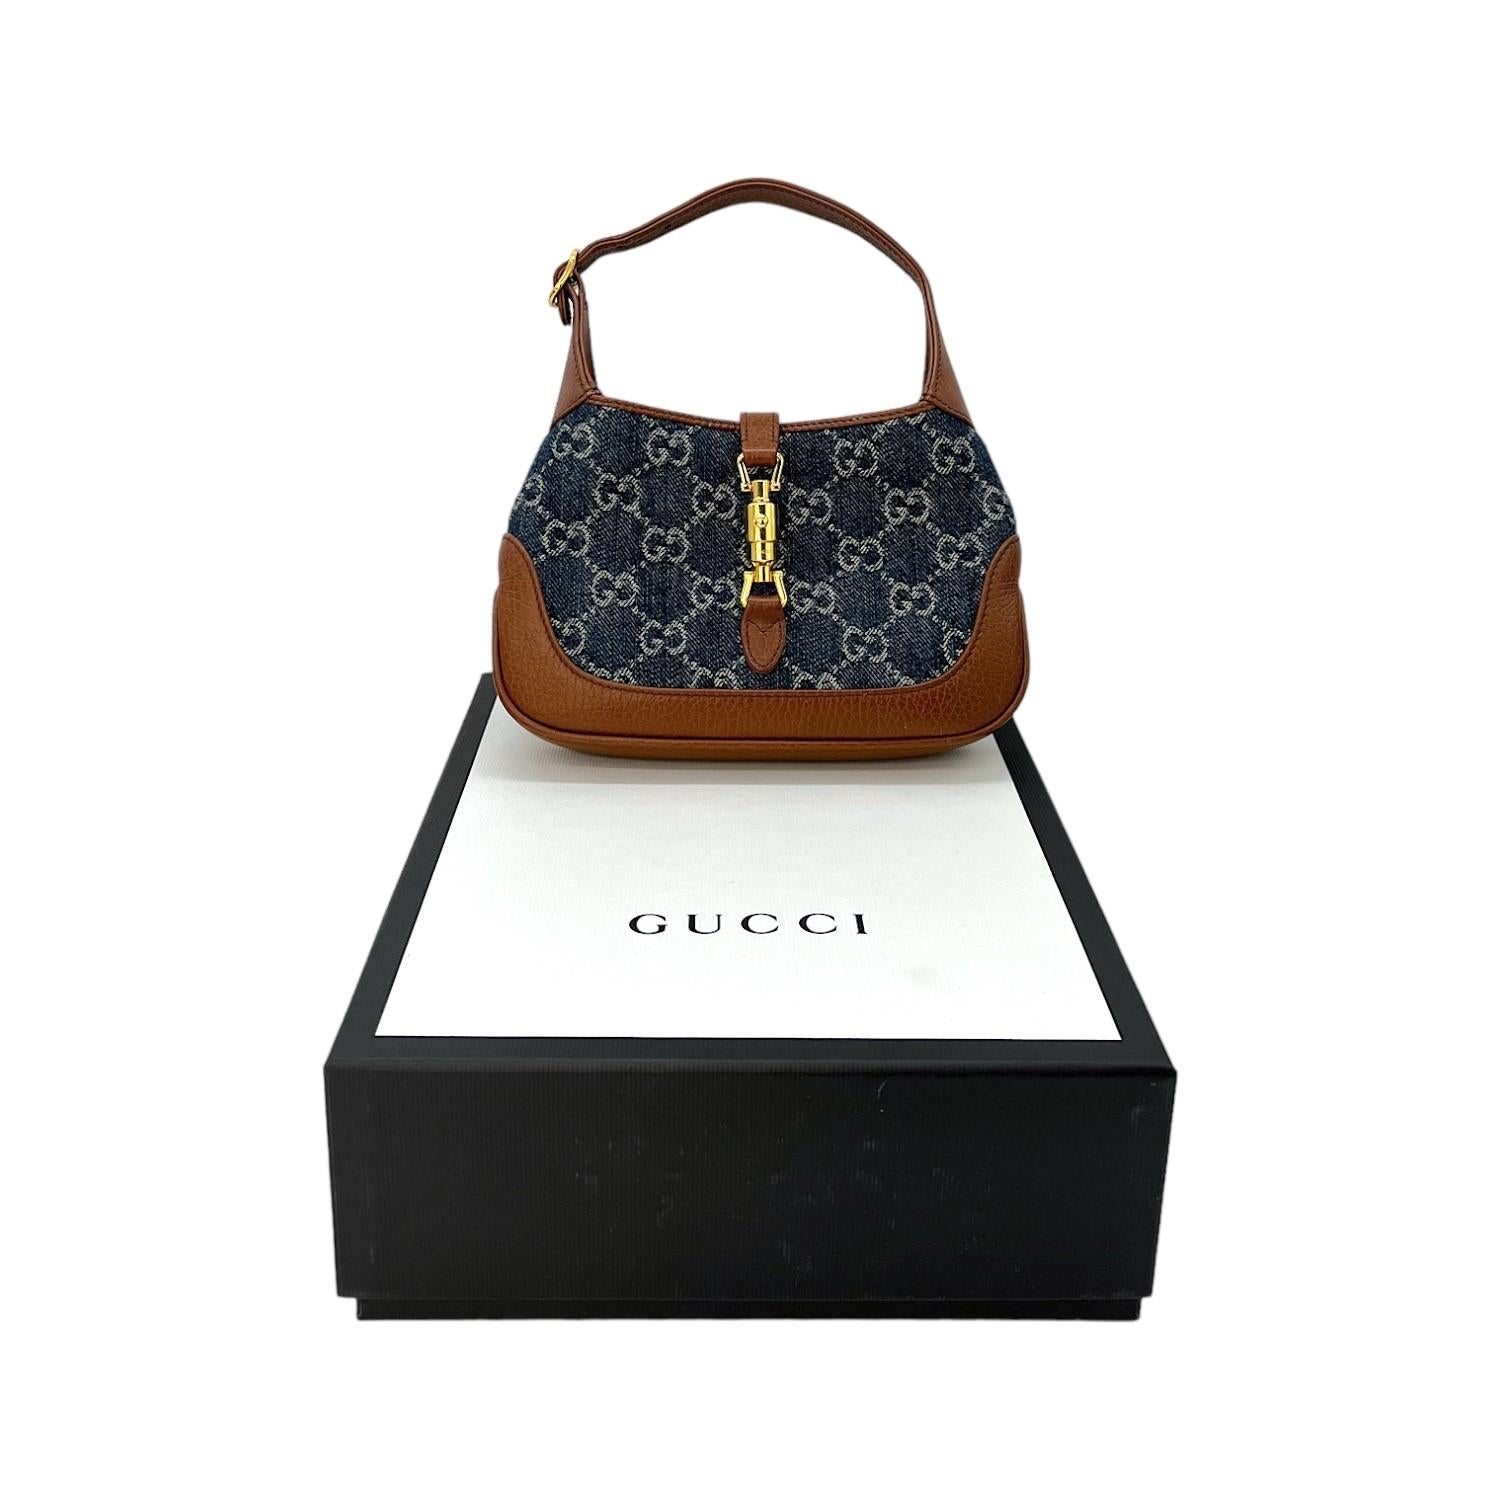 This Gucci Mini Jackie 1961 Hobo was made in Italy and it is finely crafted of Gucci GG Monogram denim with calfskin leather trimming and gold-tone hardware features. It has a flat leather handle and it also comes with a flat leather strap that you